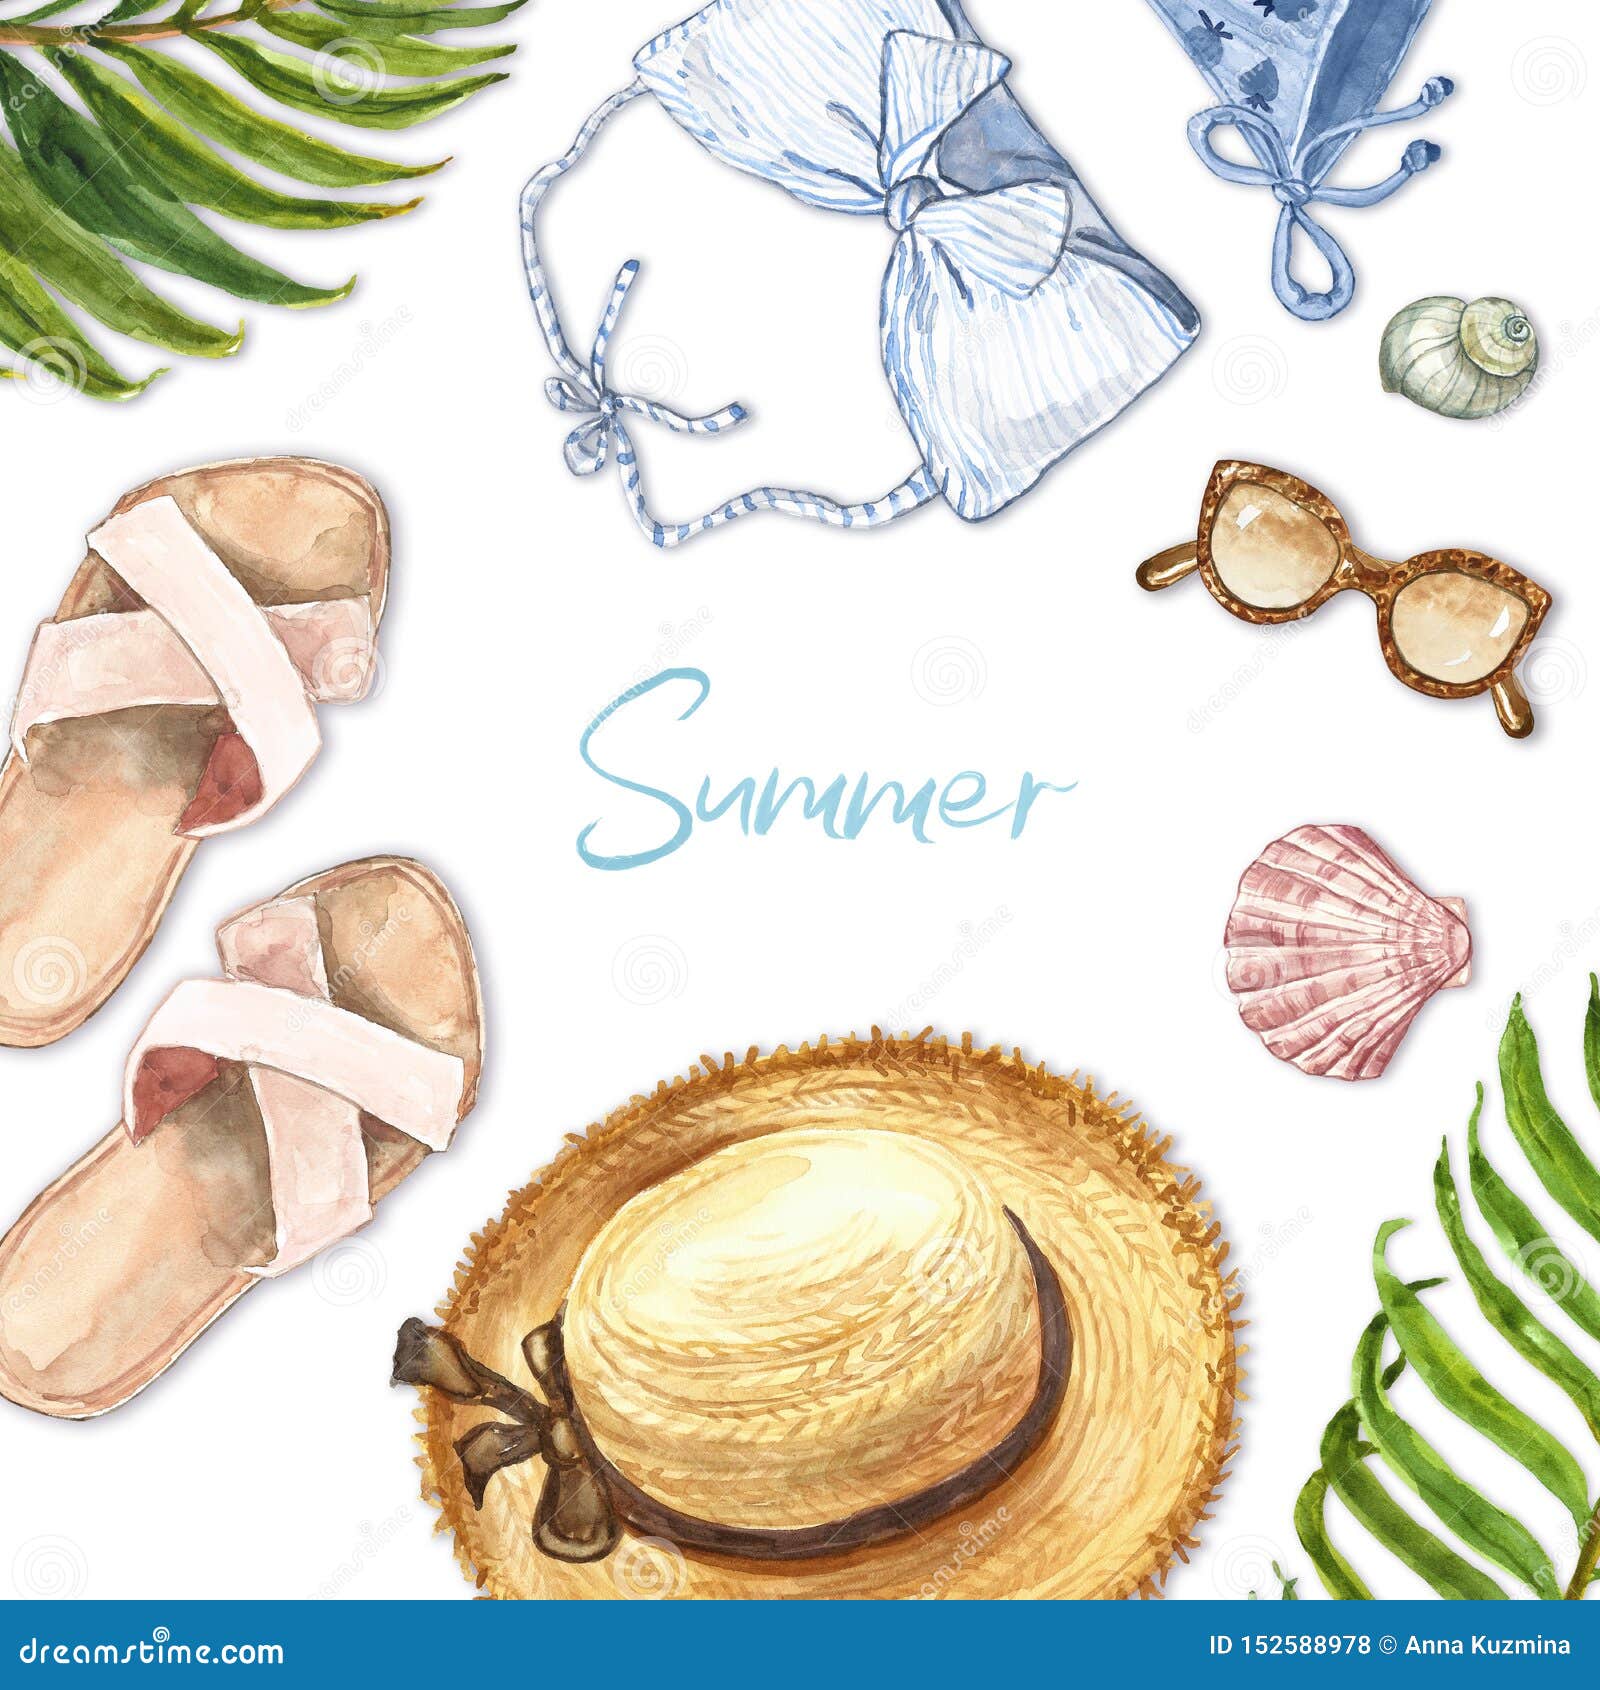 Watercolor Summer Flat Lay Illustration on White Background. Hand ...